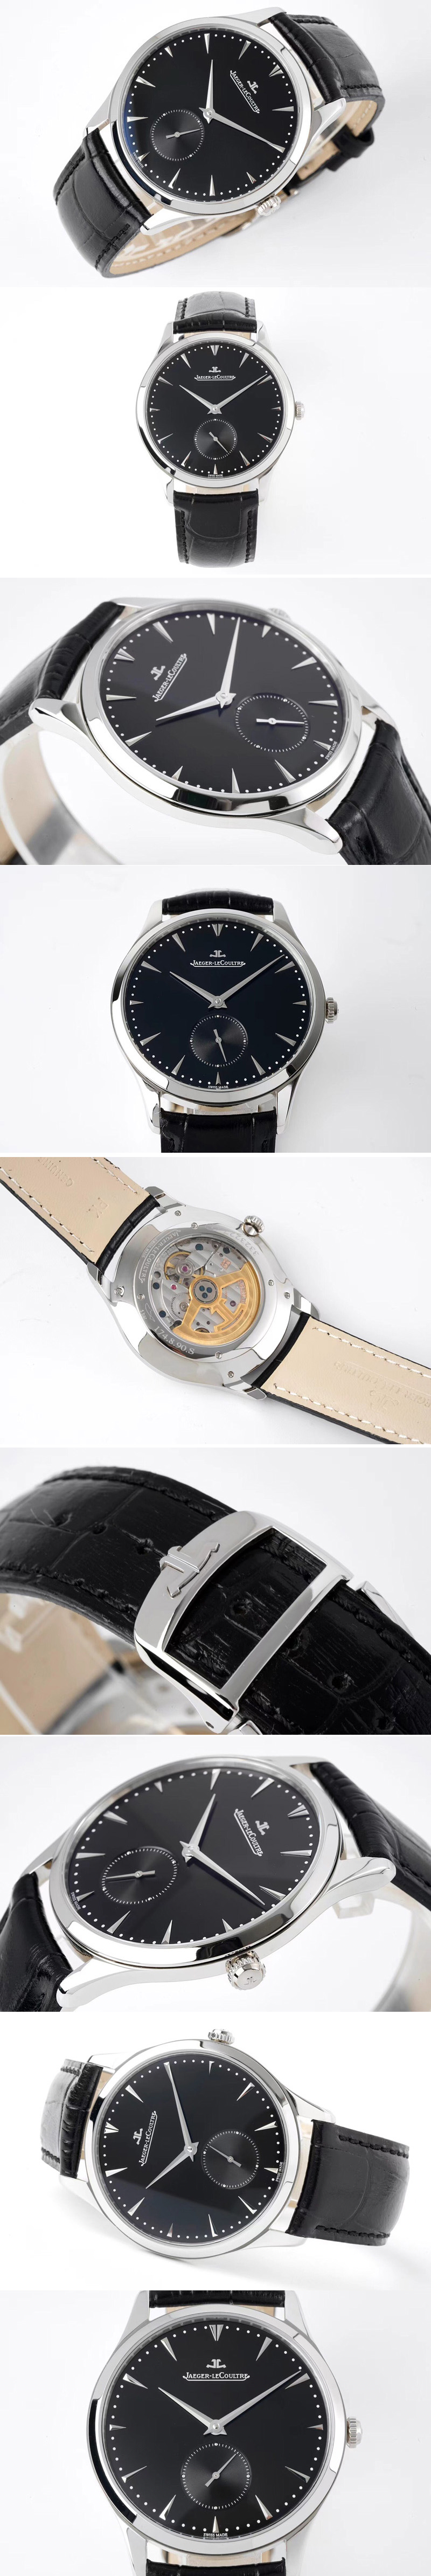 Replica Jaeger-LeCoultre Master Ultra Thin Small Second SS ZF 1:1 Best Edition Black Dial on Black Leather Strap A896